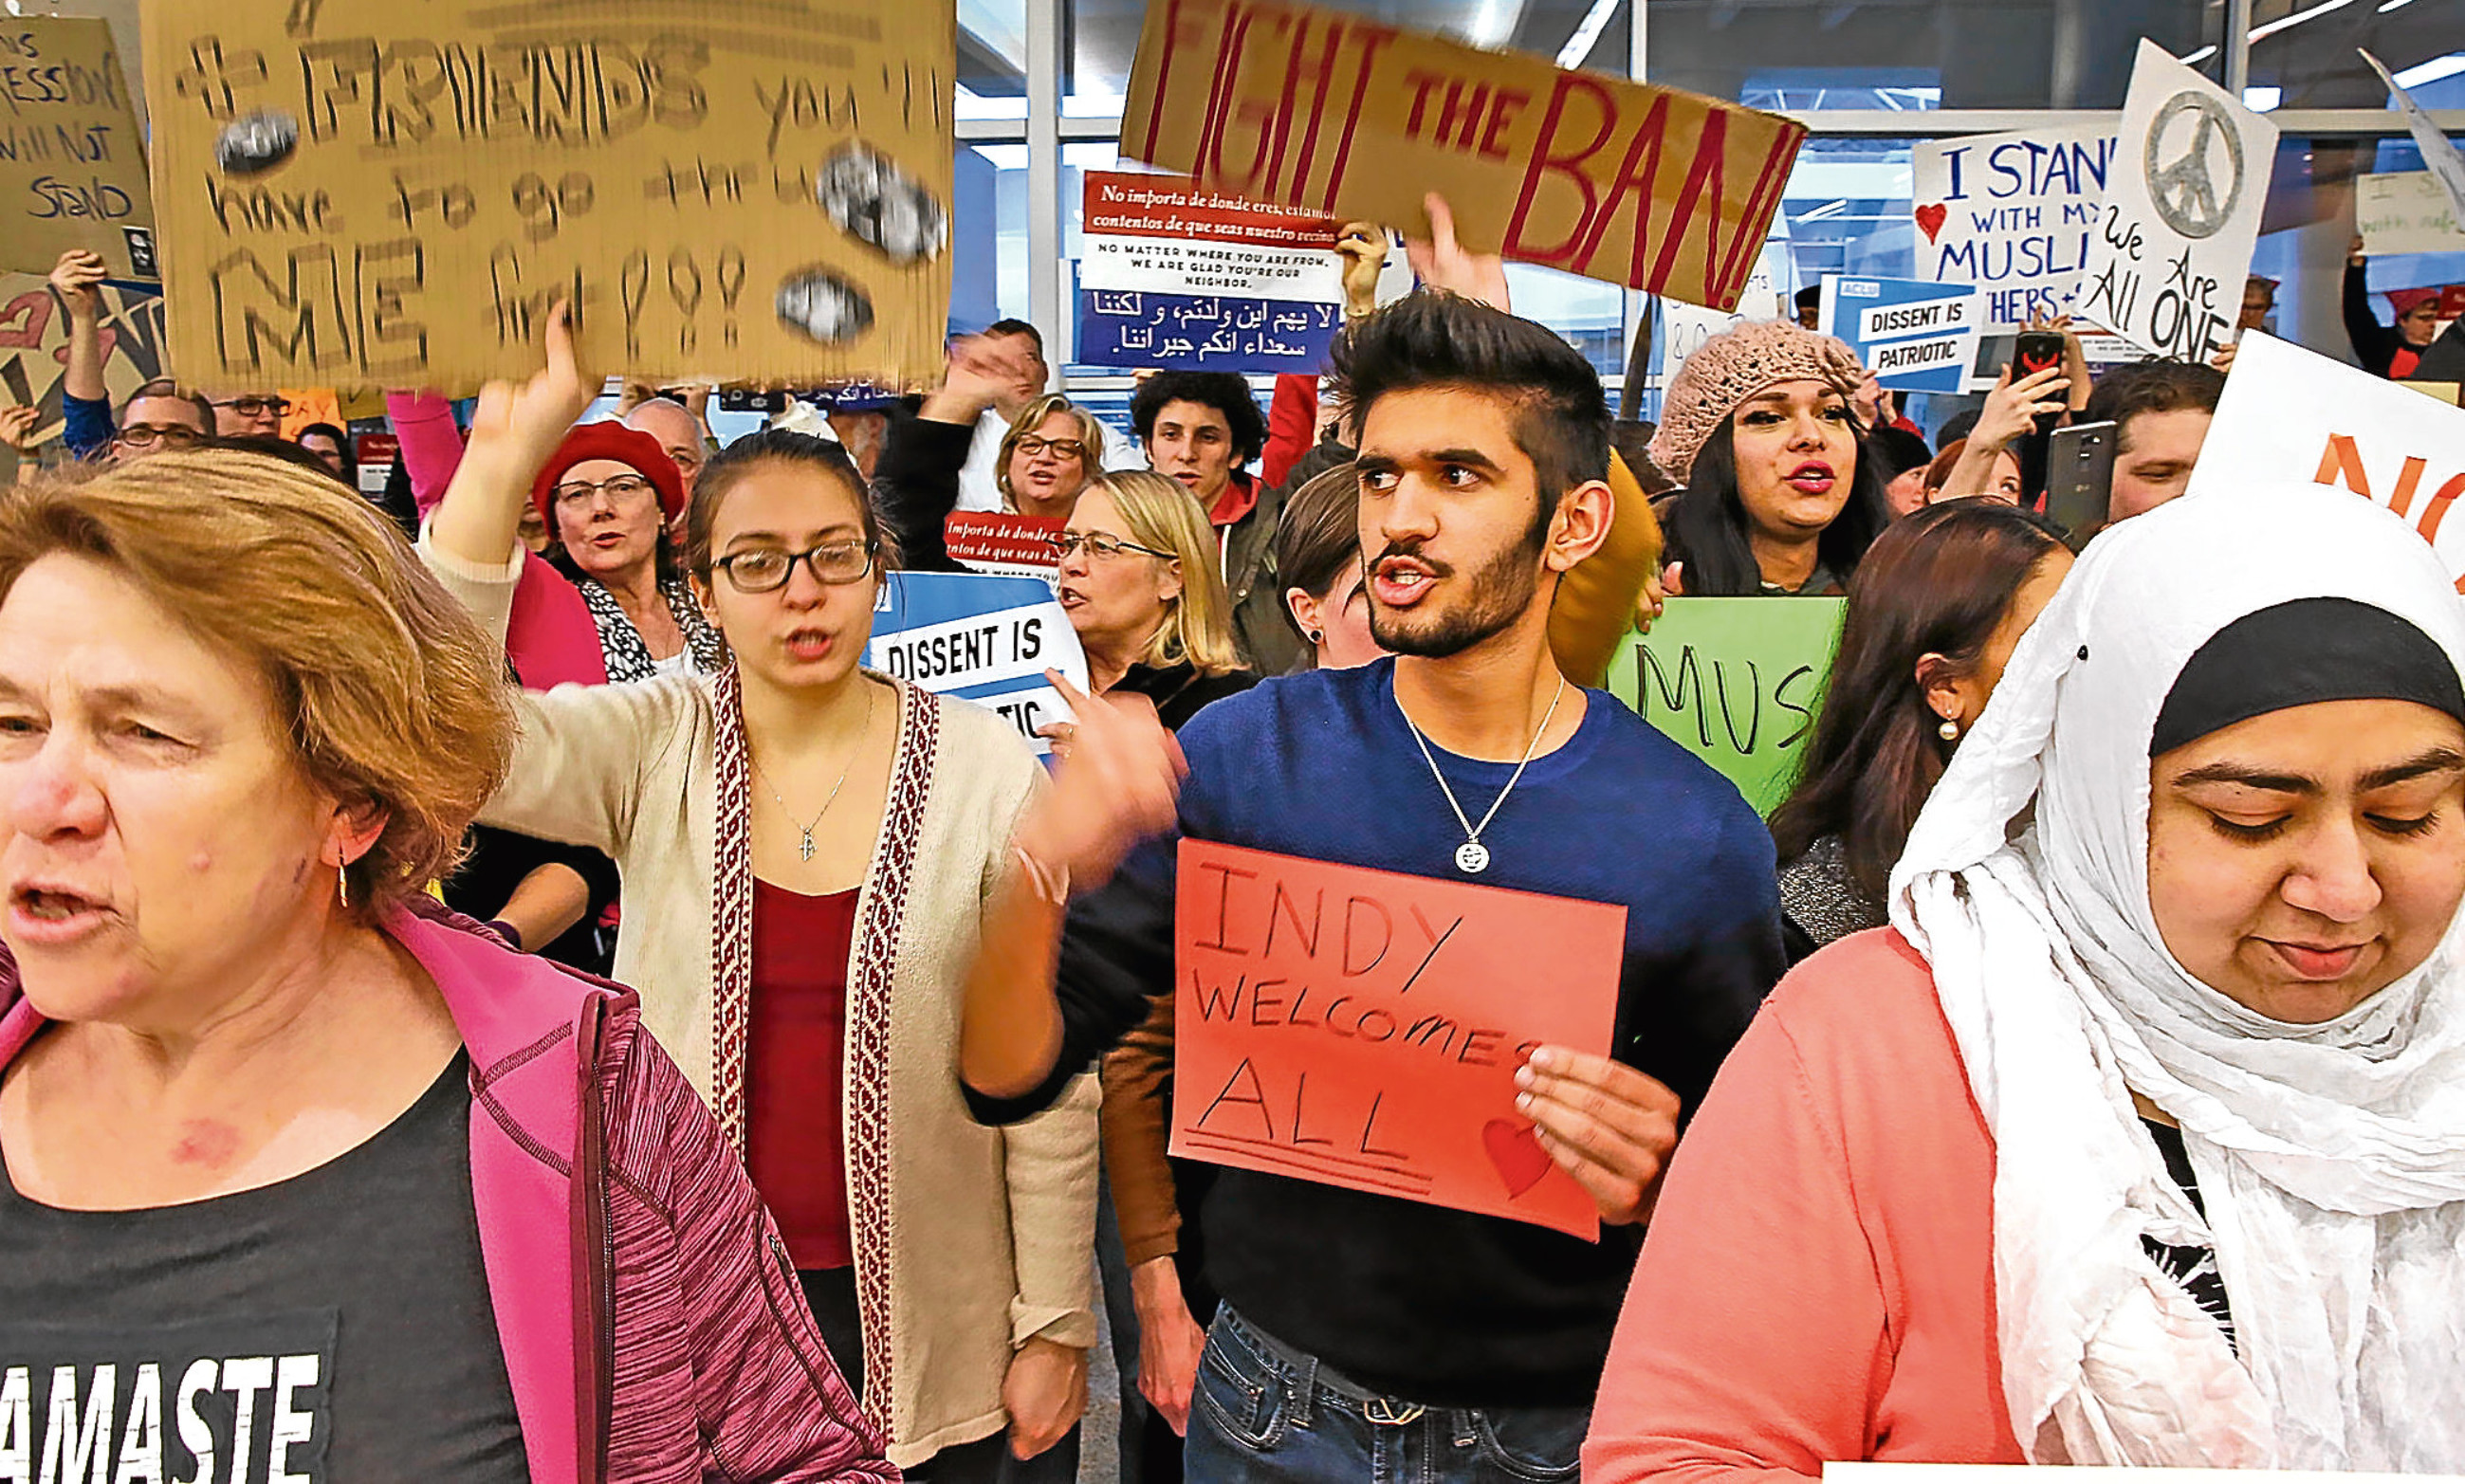 People protest against Donald Trump’s immigration moves at Indianapolis airport.